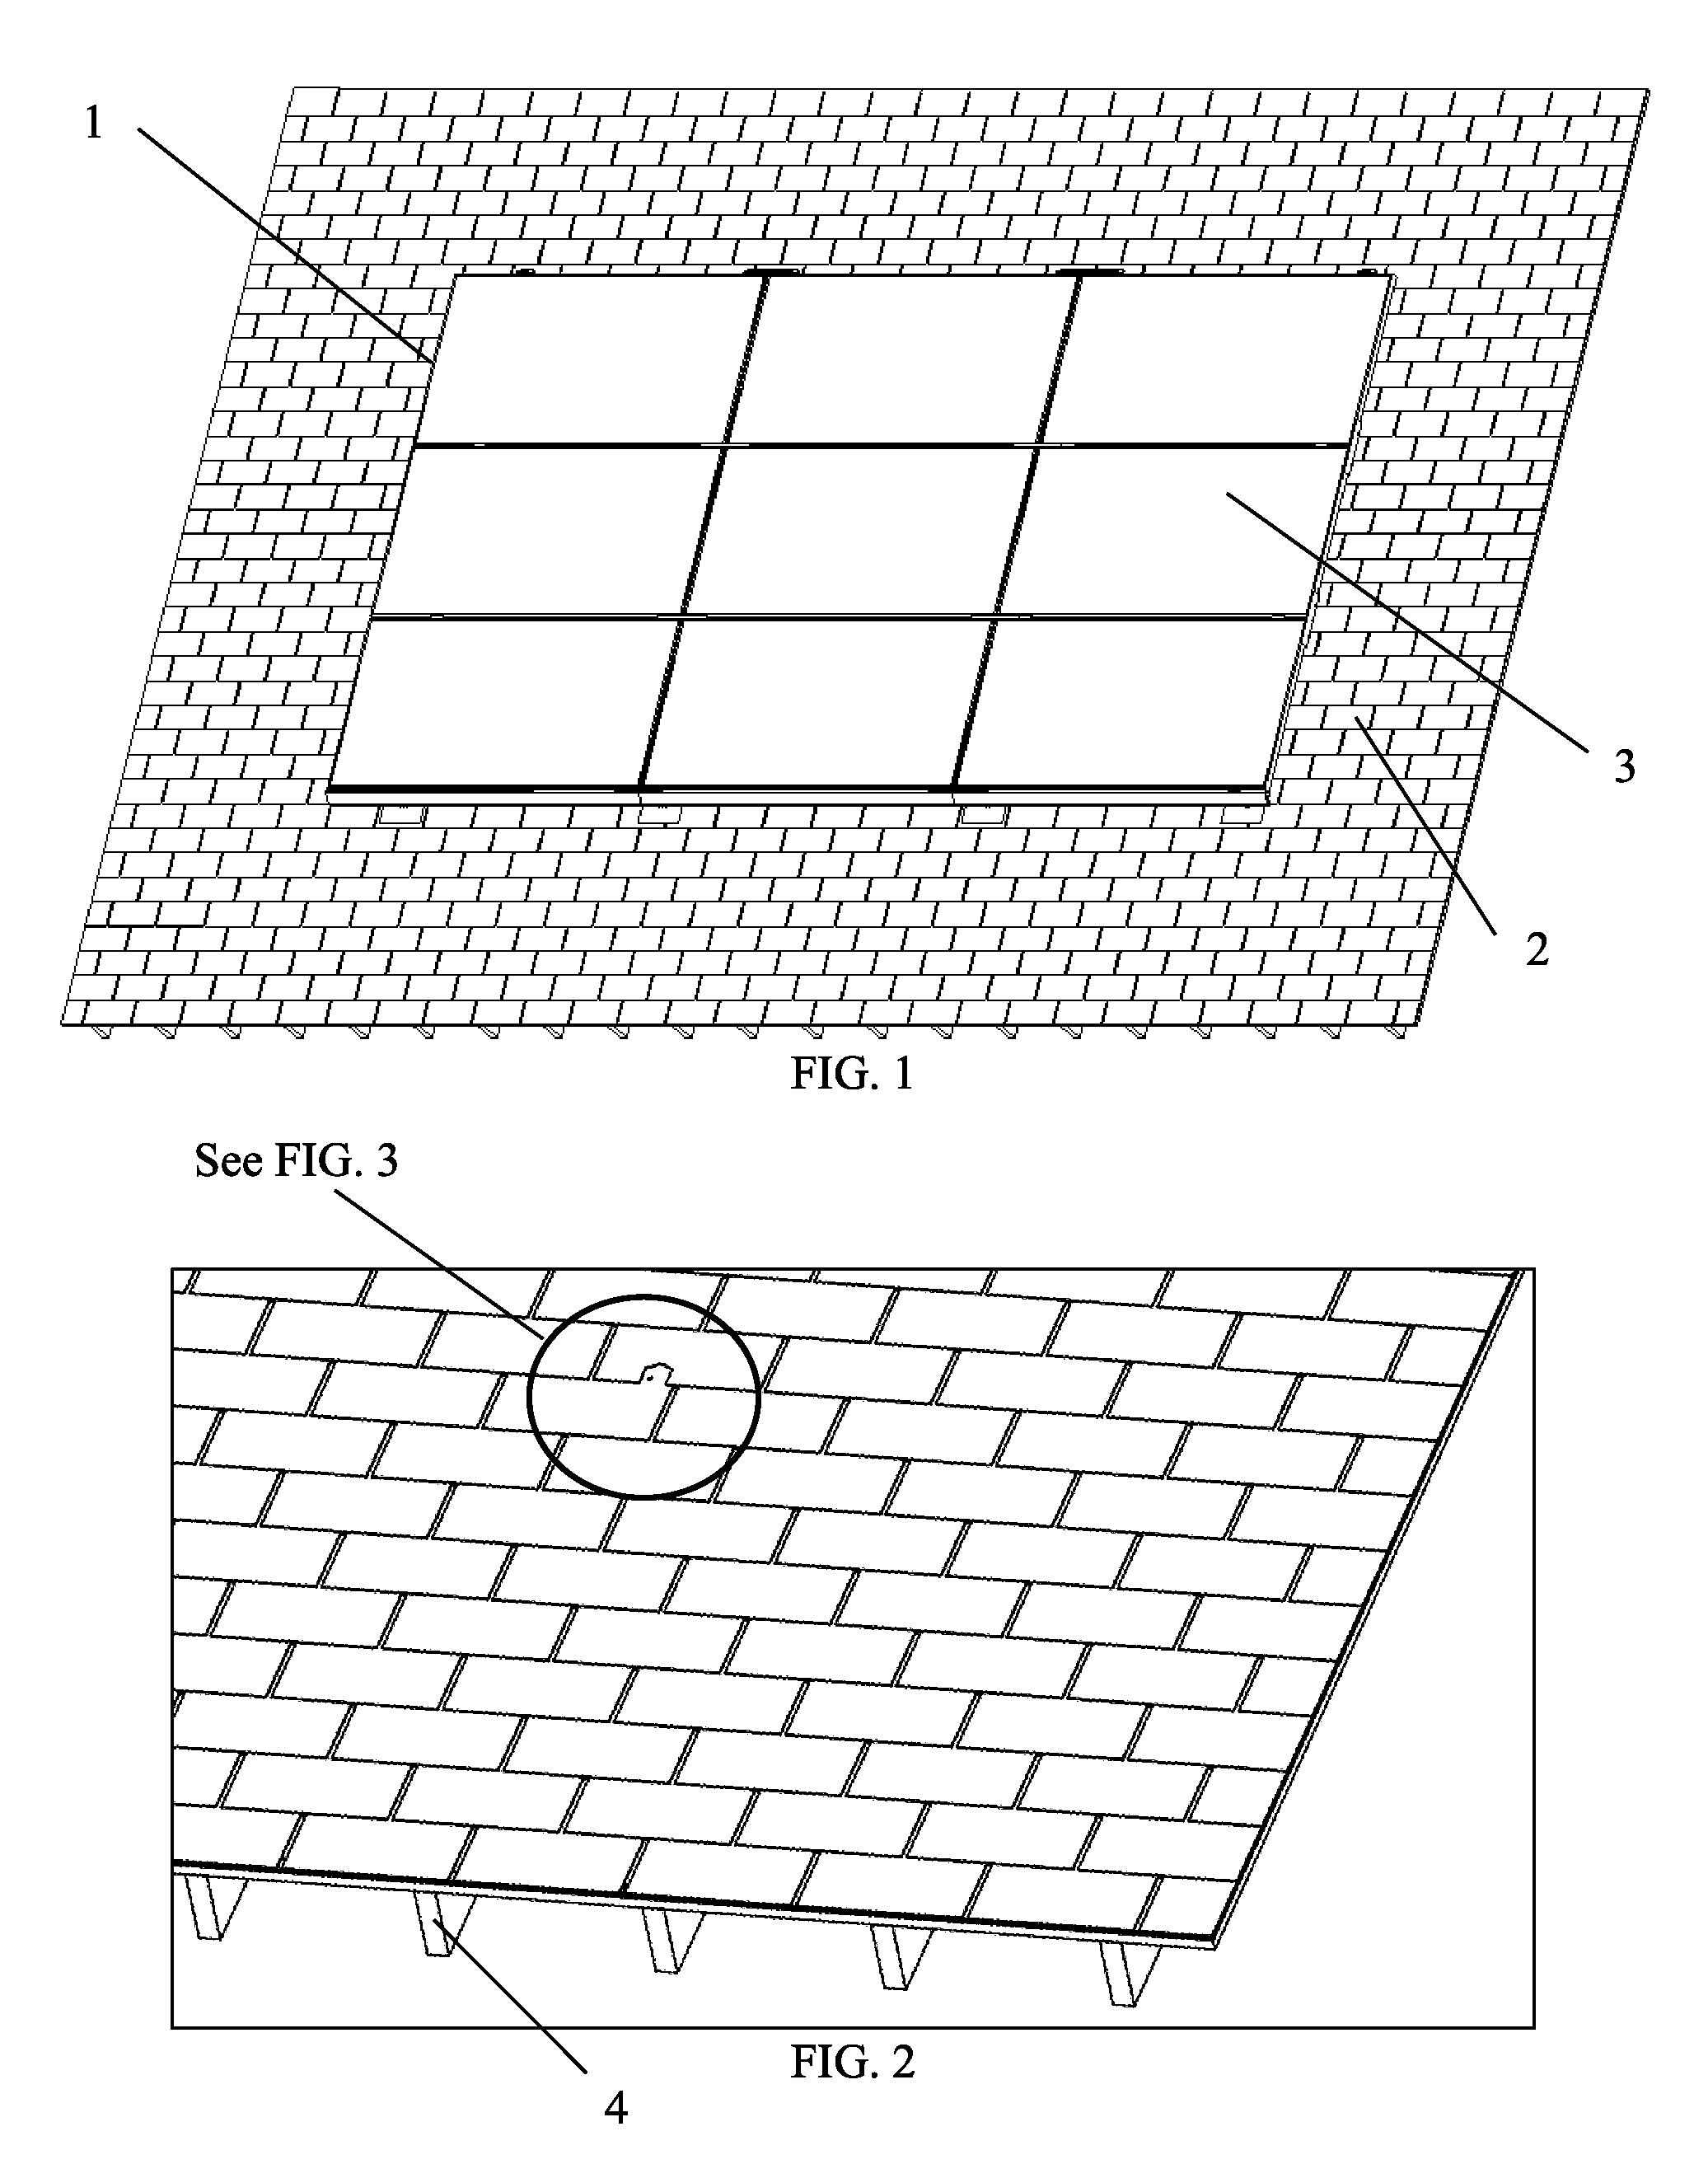 Method and apparatus for mounting solar panels